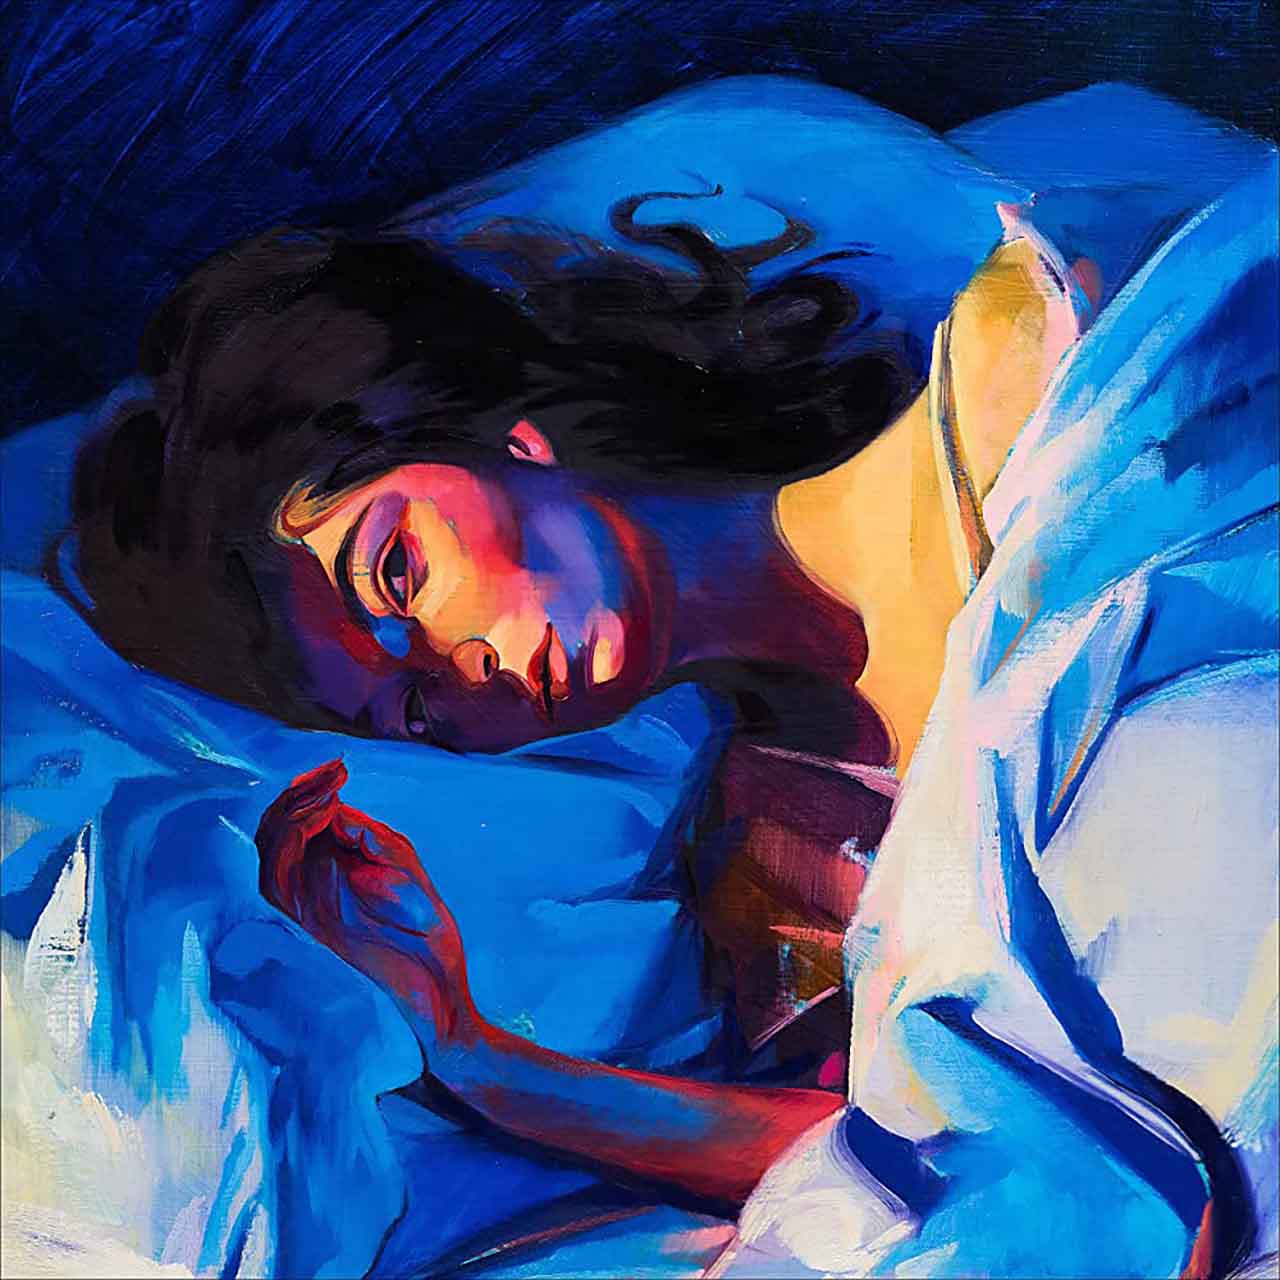 ‘Melodrama’: Lorde’s Sparkling Farewell to Adolescent Emotions